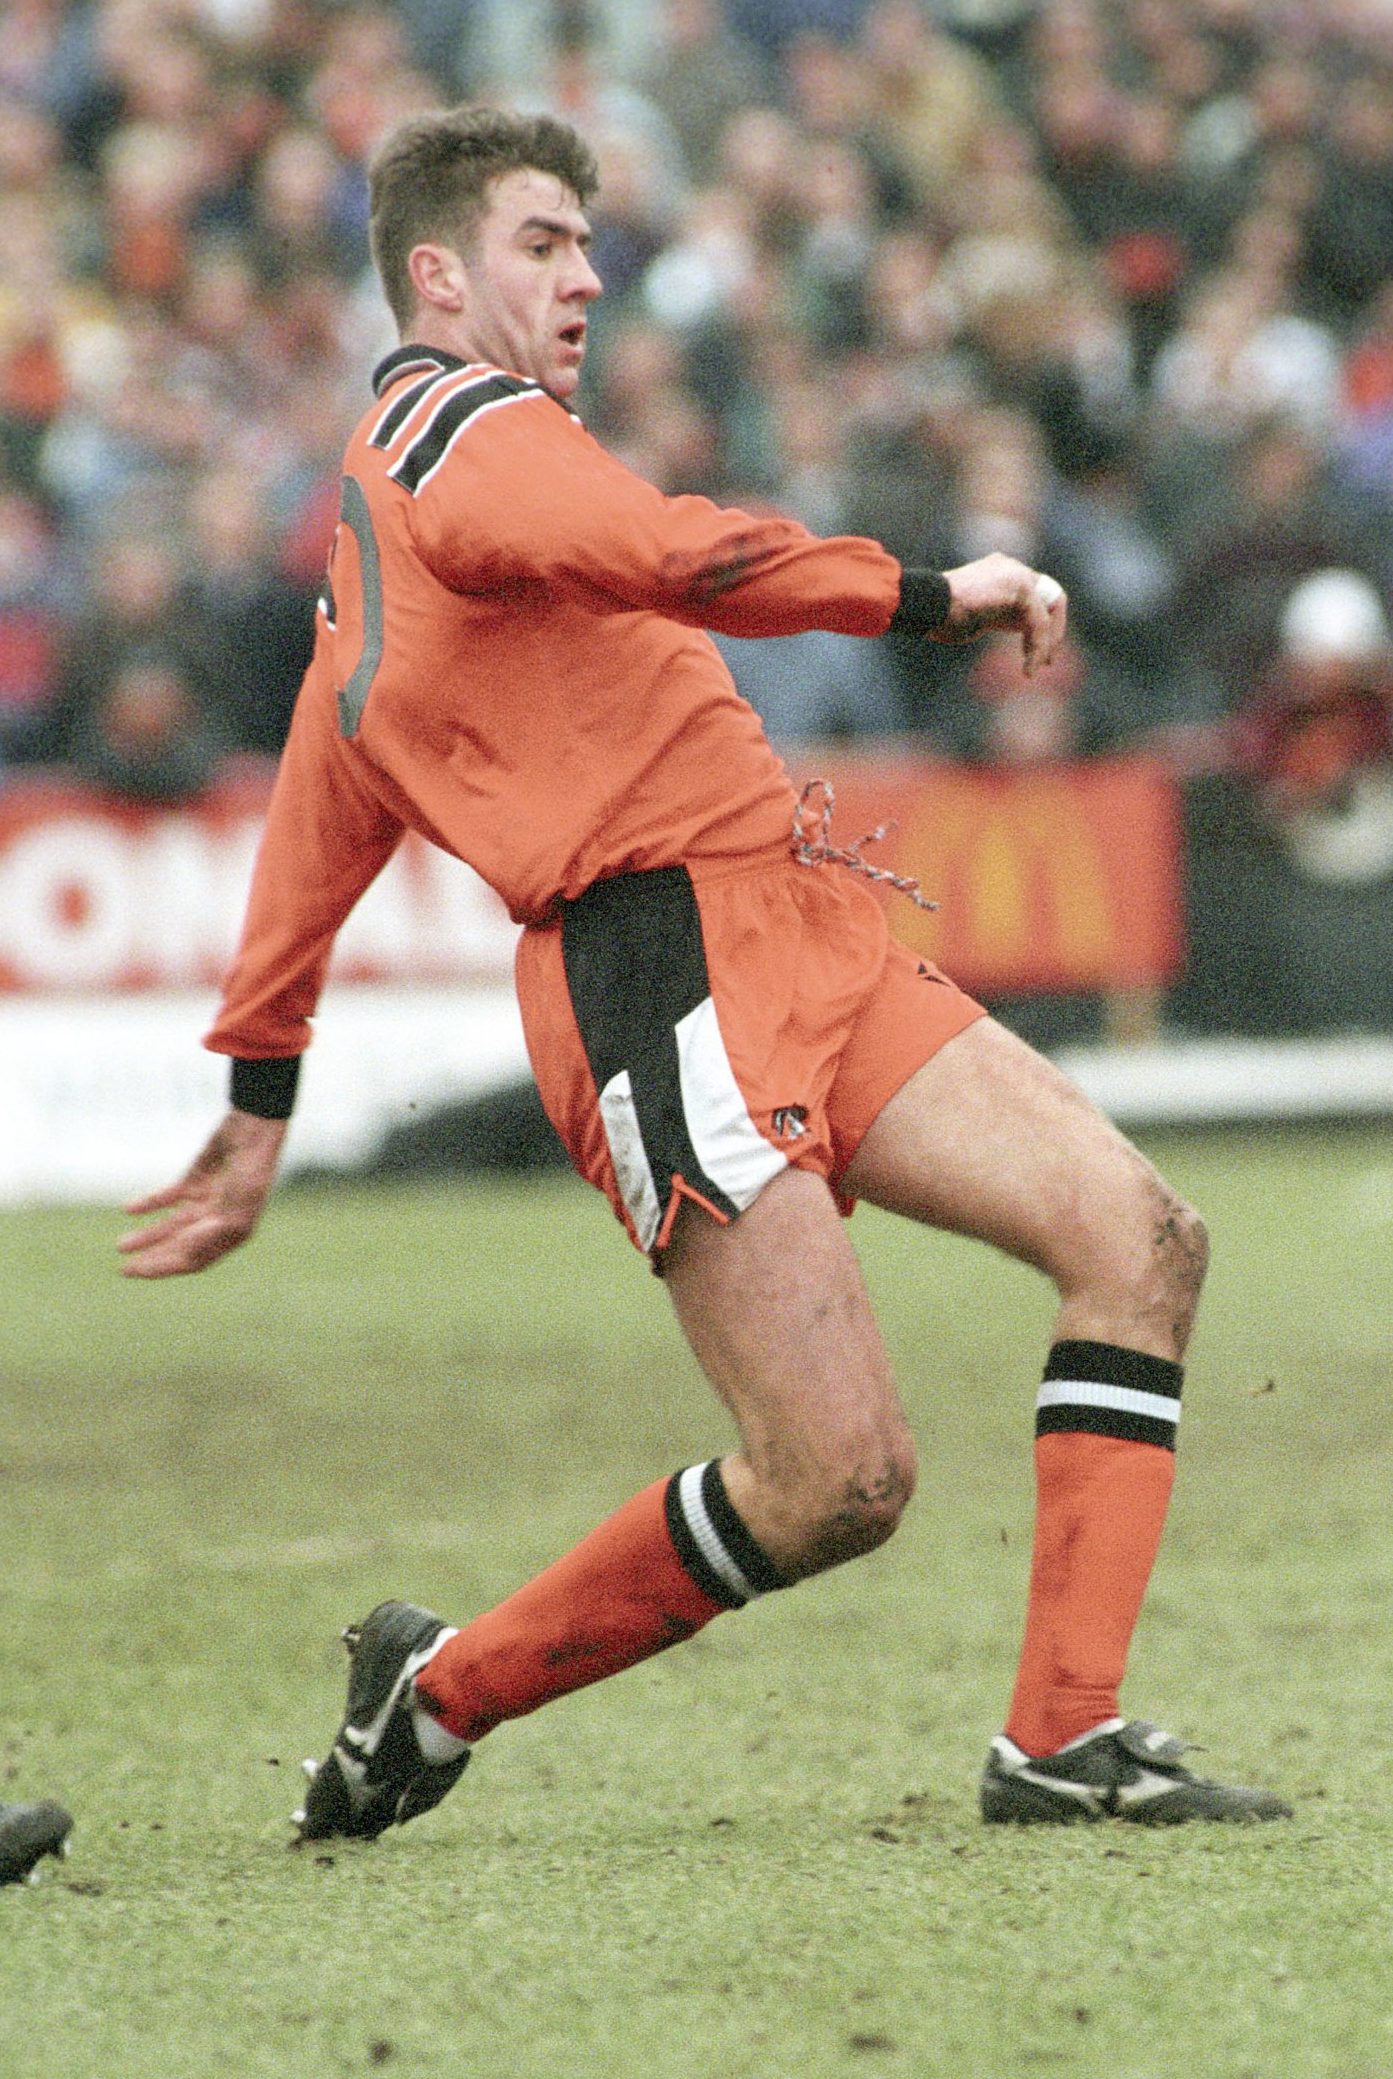 Craig Brewster of Dundee United against Airdrie in 1994.